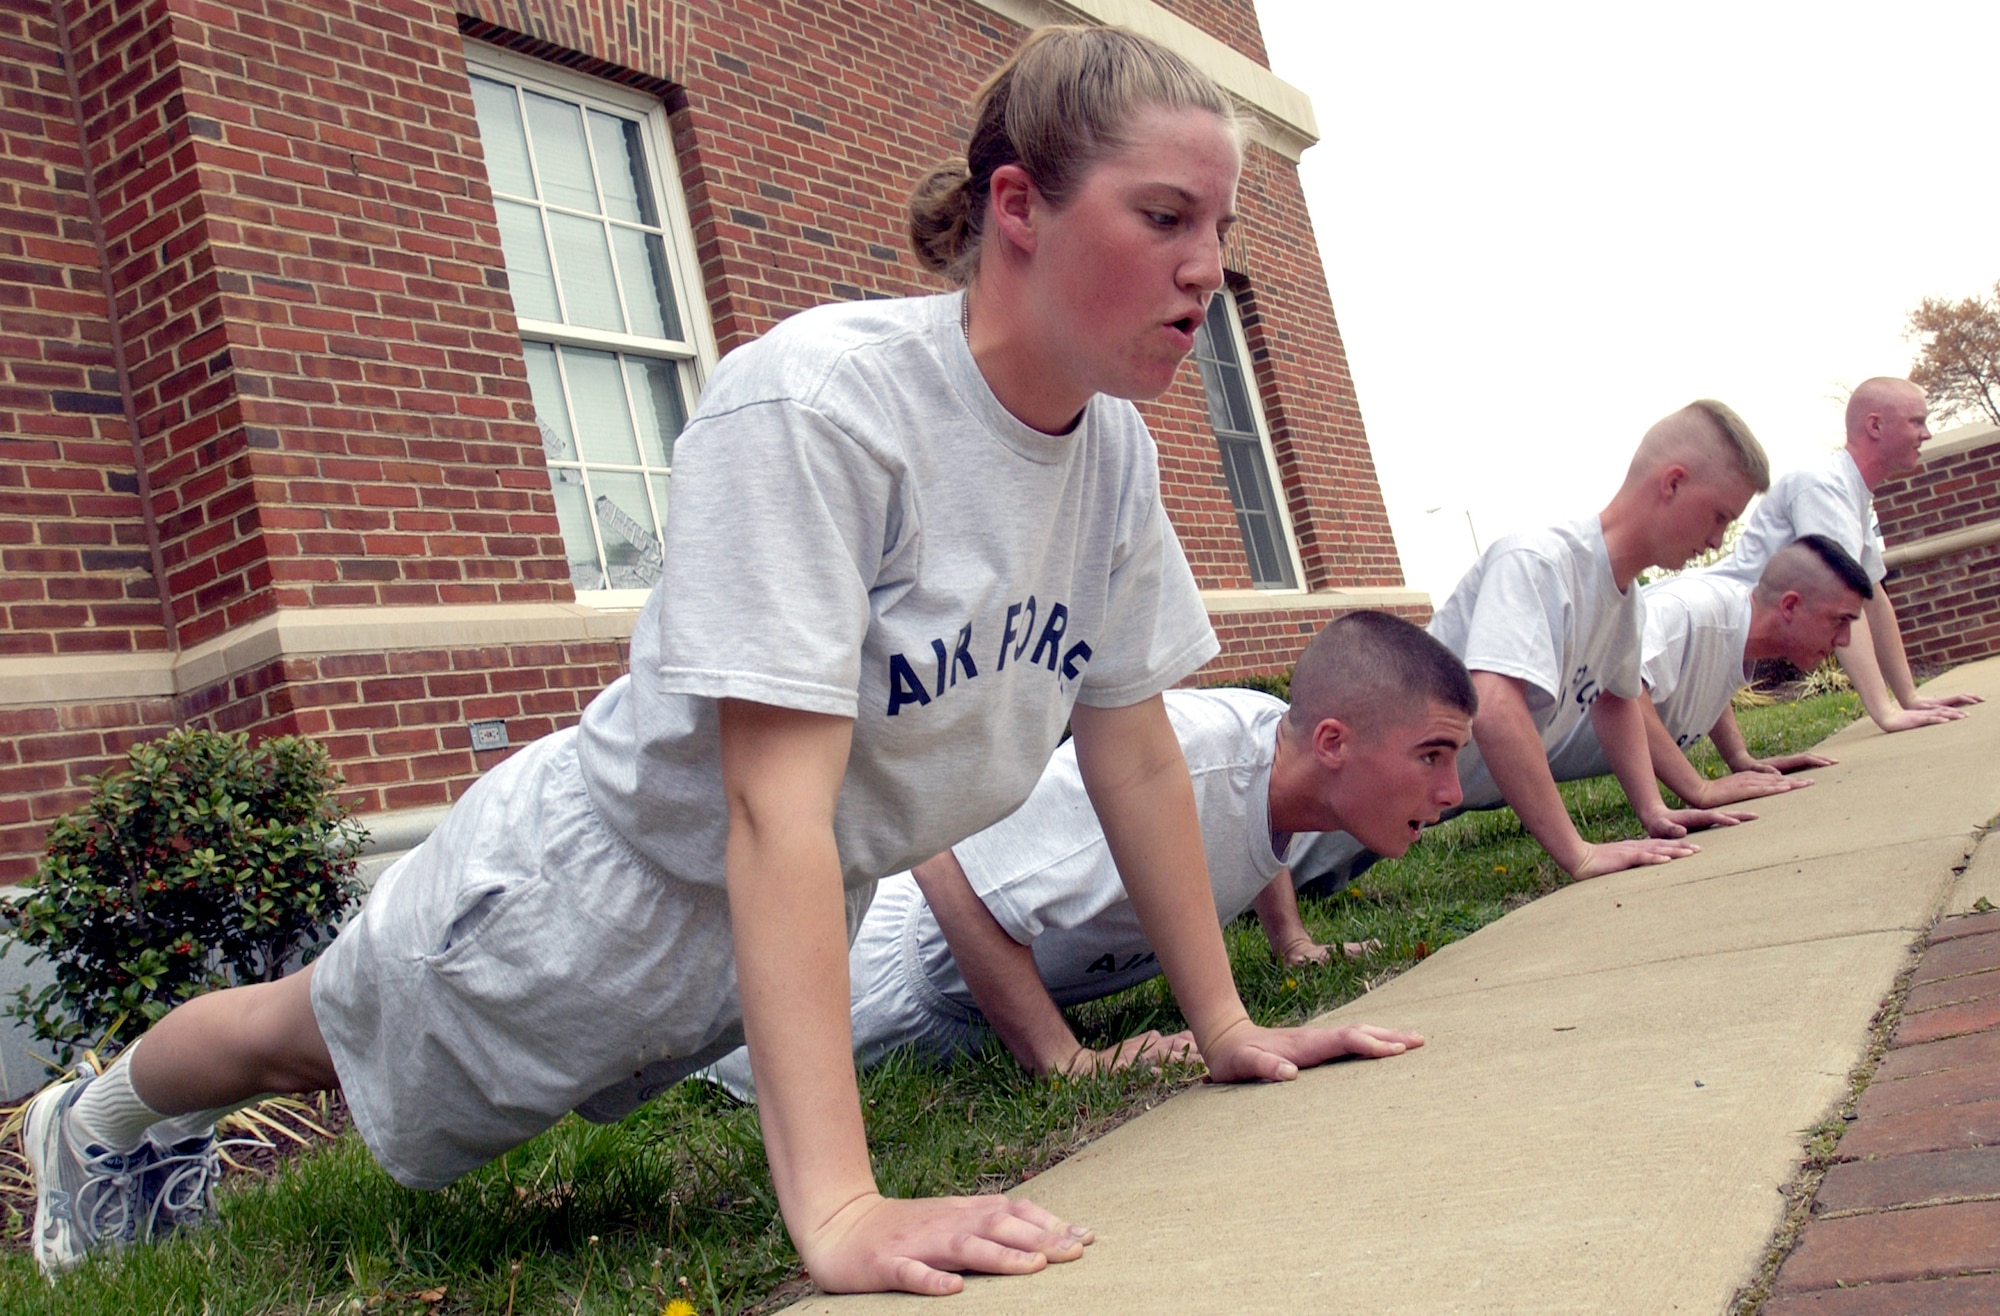 BOLLING AIR FORCE BASE, D.C. -- Trainees at the U.S. Air Force Honor Guard technical school here participate in a physical-fitness routine several times a week.  Their routine, which includes push-ups, crunches and a 1.5-mile run, mirrors the proposed Air Force fitness standards, which will be implemented in January 2004.  (U.S. Air Force photo by Master Sgt. Jim Varhegyi)